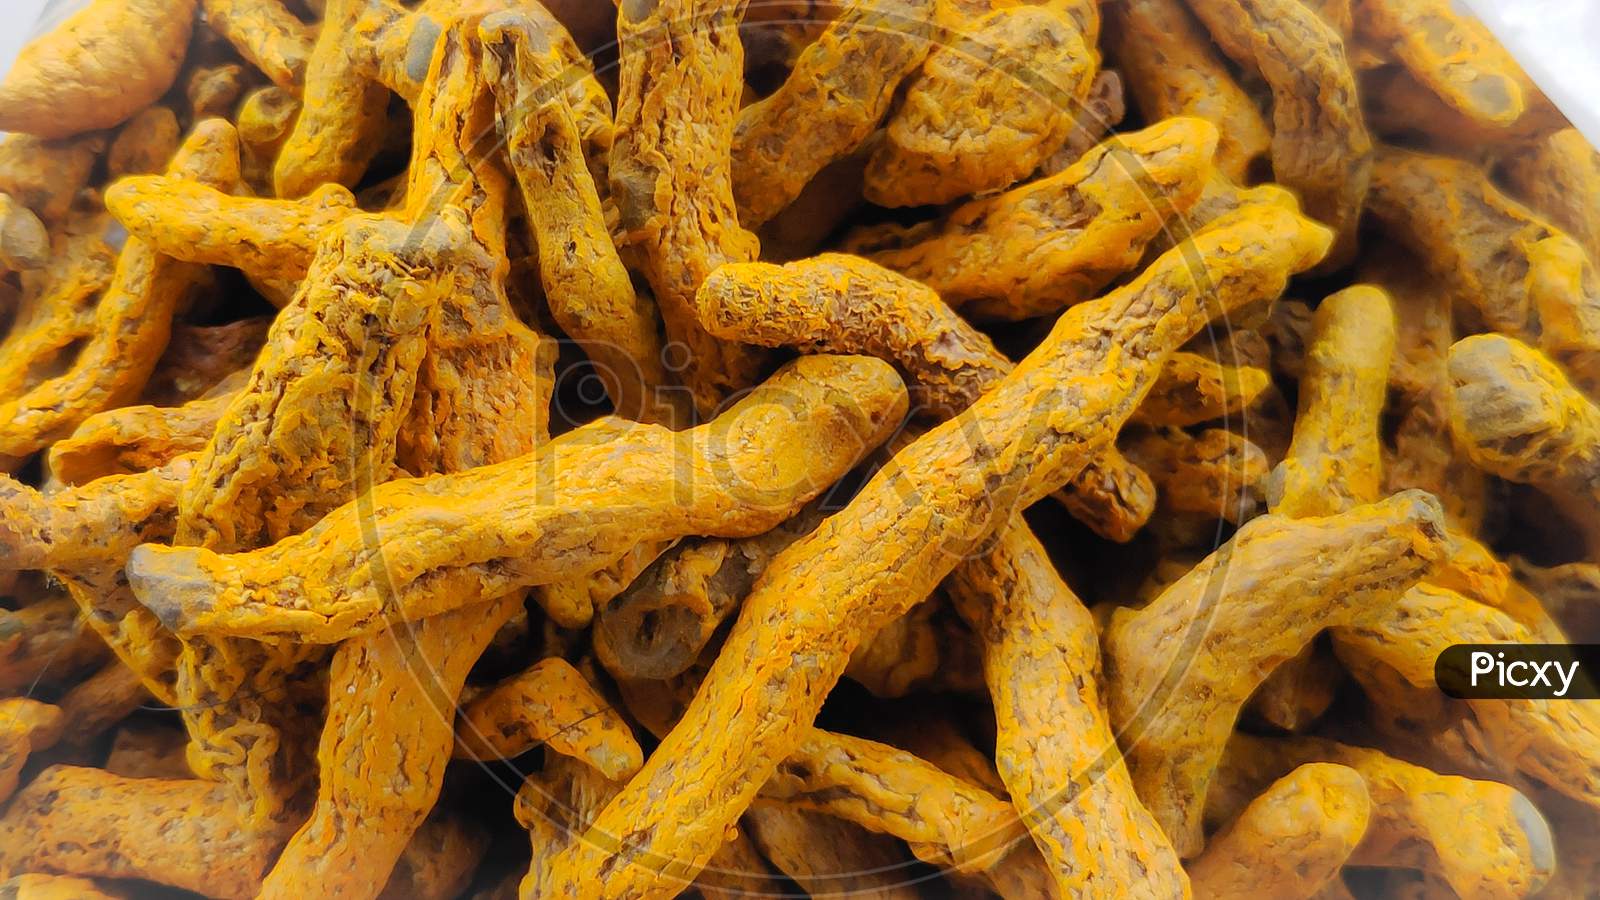 Pure Organic Turmeric sticks were cultivated by Village farmers